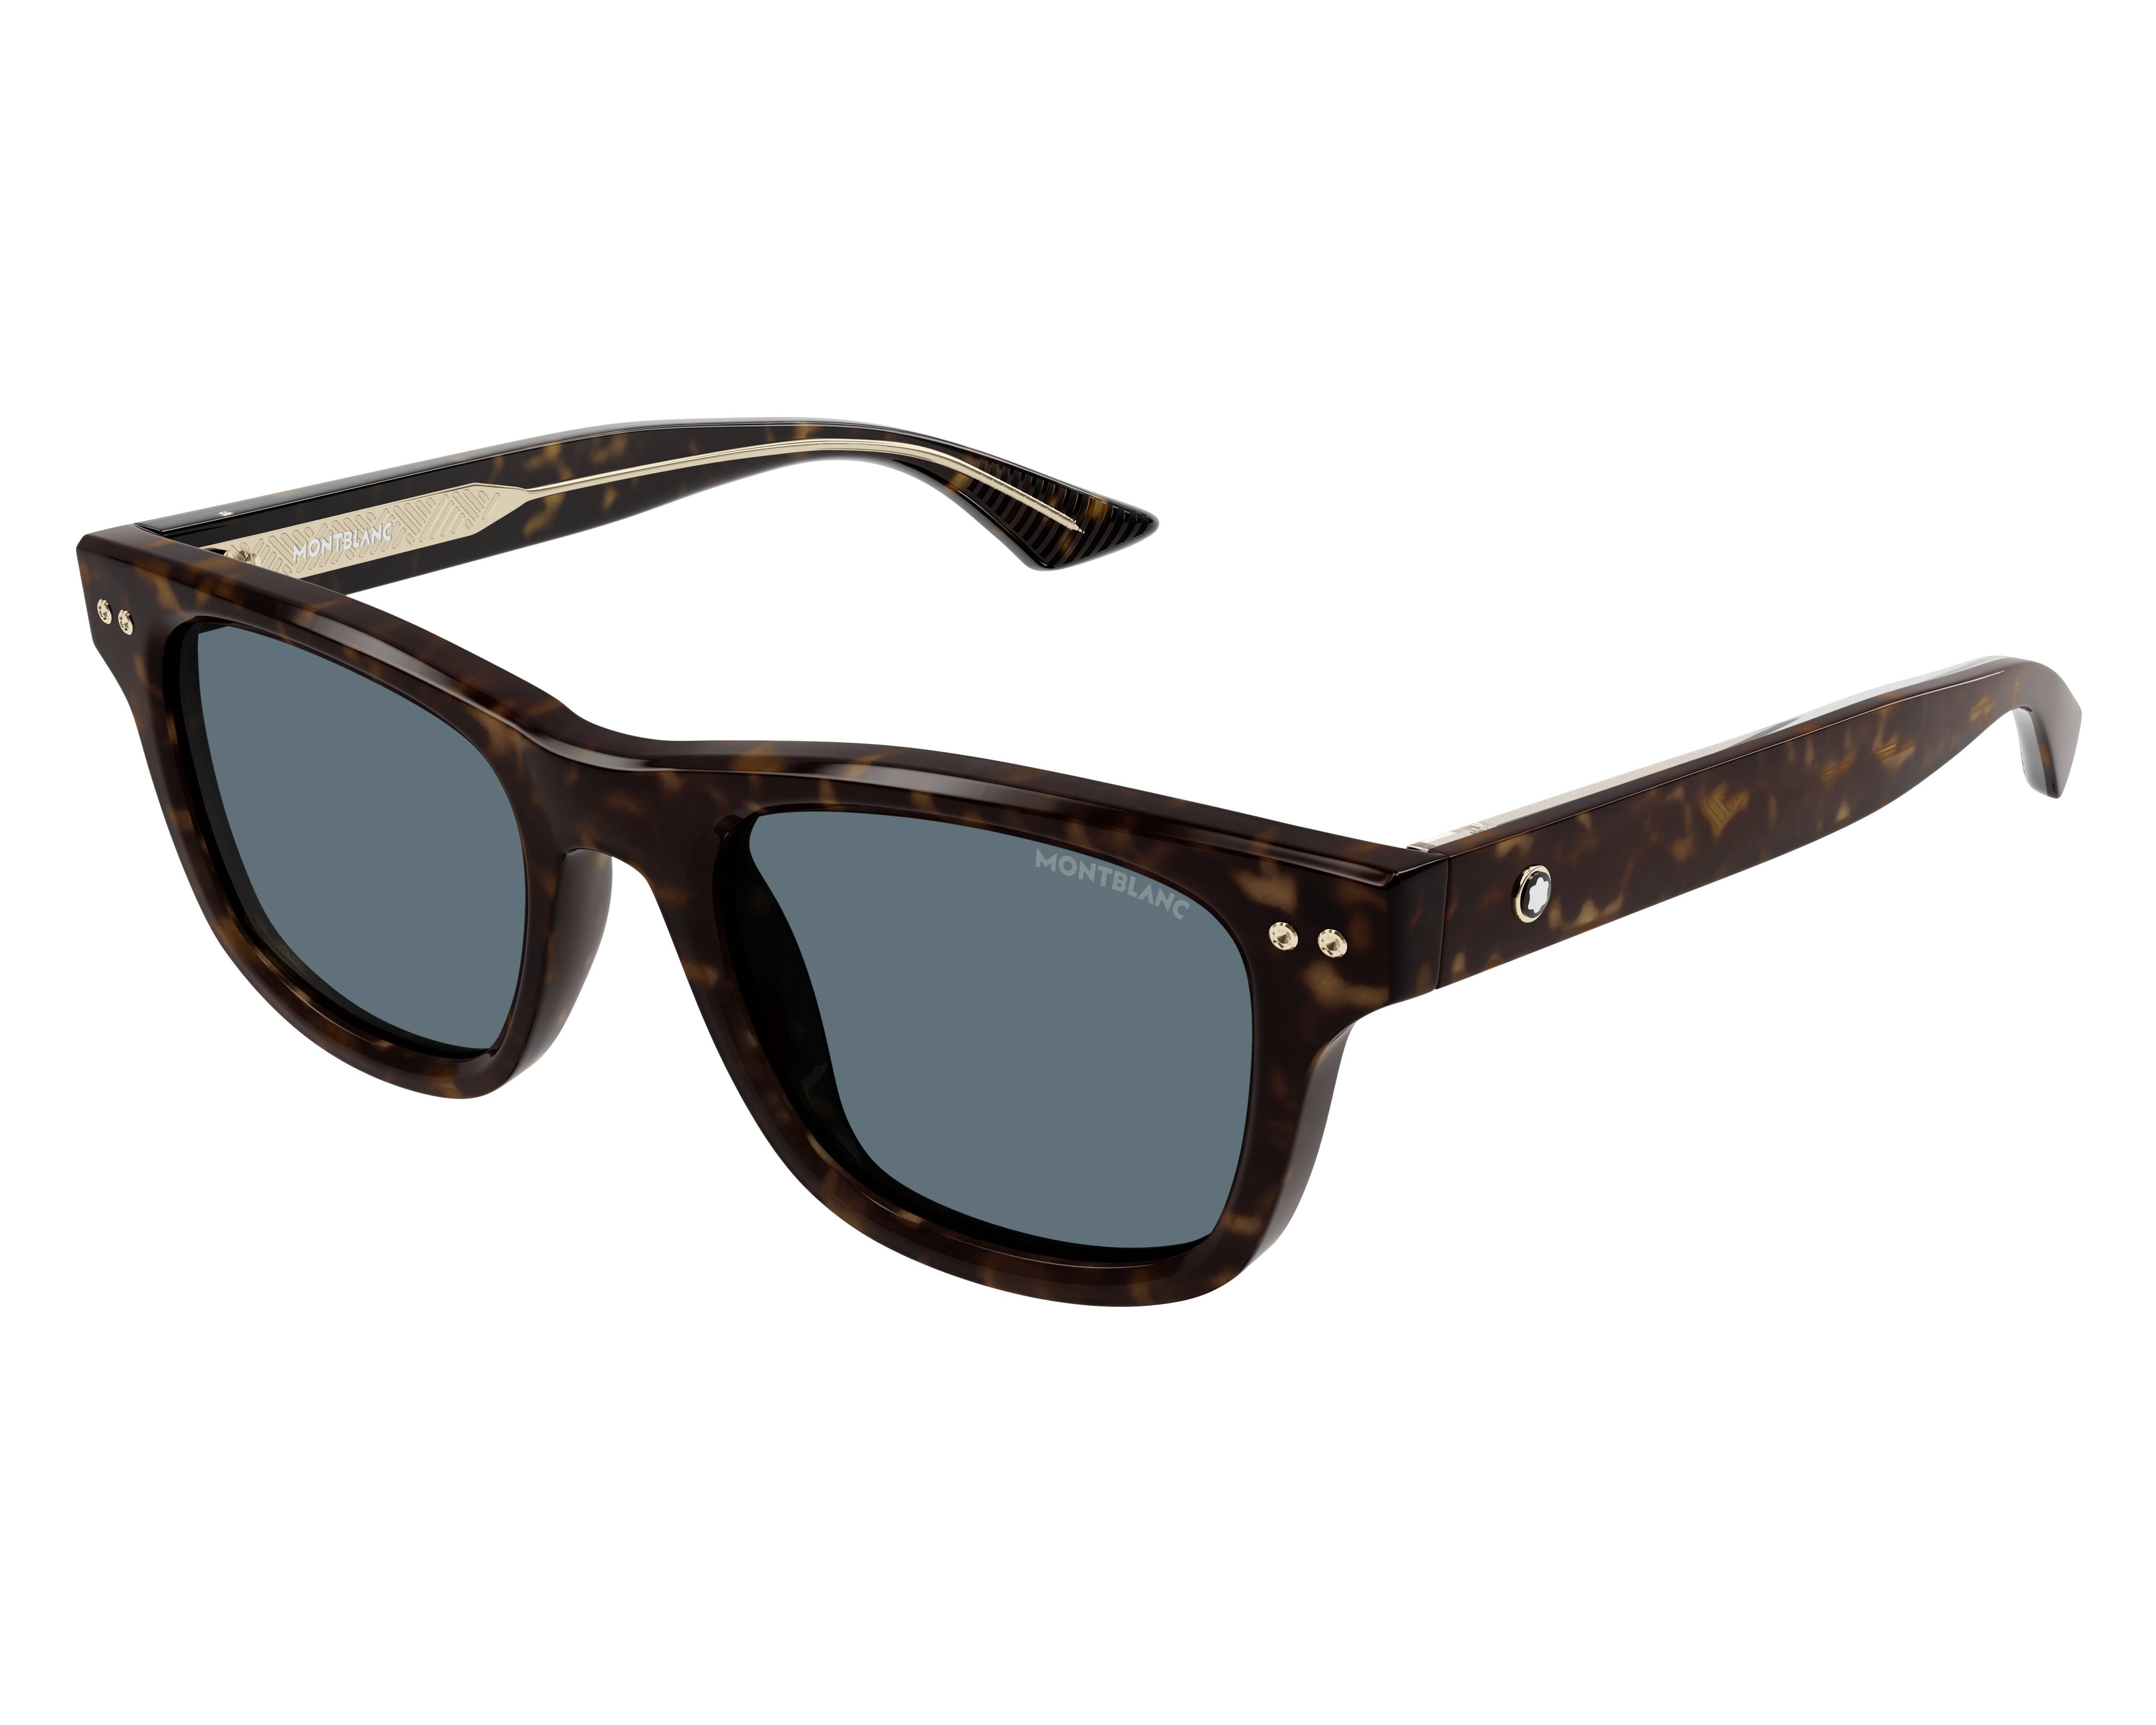 "Shop Mont Blanc MB0254S Square Sunglasses for Men at Optorium - Elevate your style with our top branded sunglasses for men. Stay cool and stylish!"